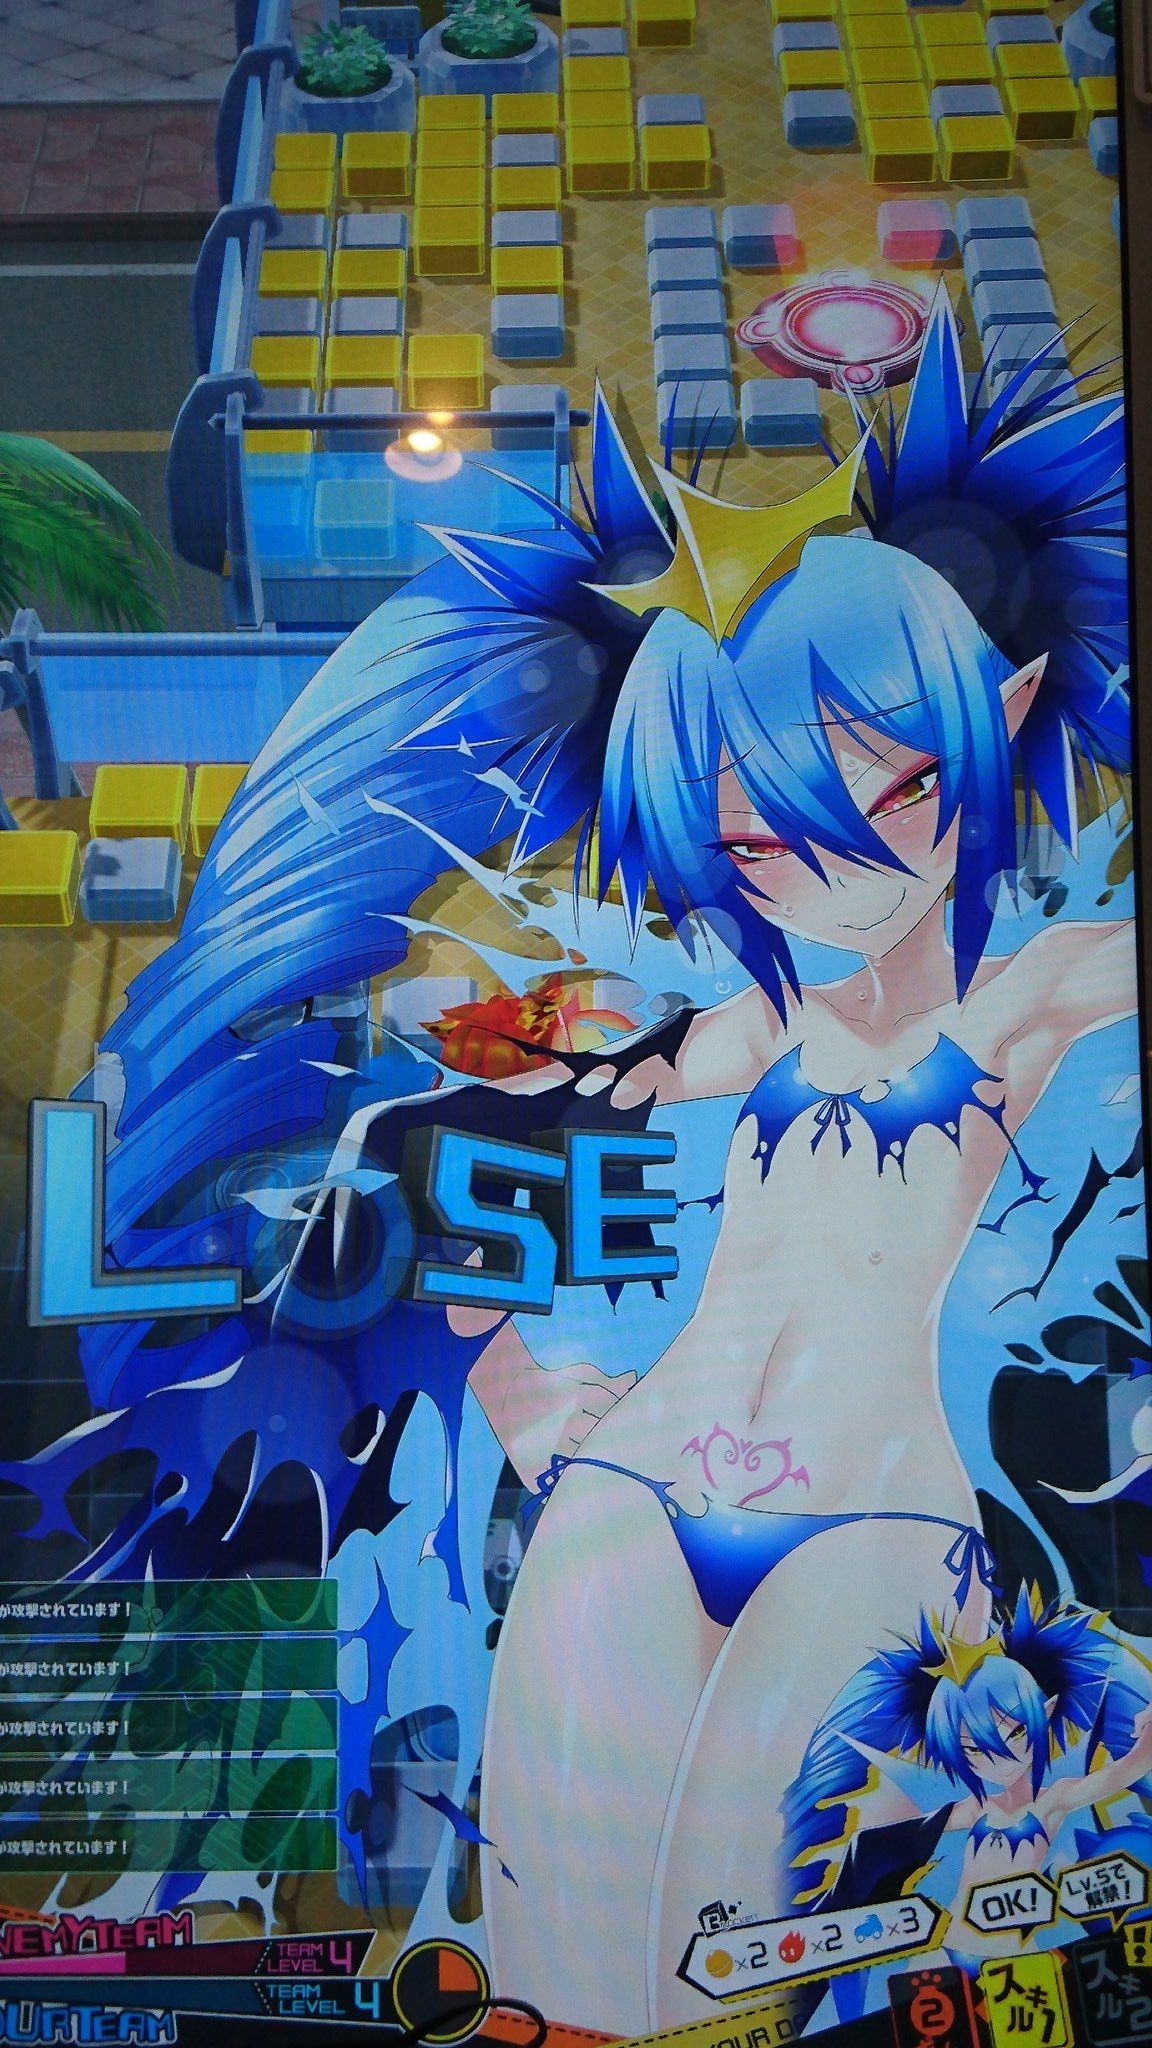 [Good news] Bomber Girl's new costume erotic too! This is already Eroge, isn't it www? 3